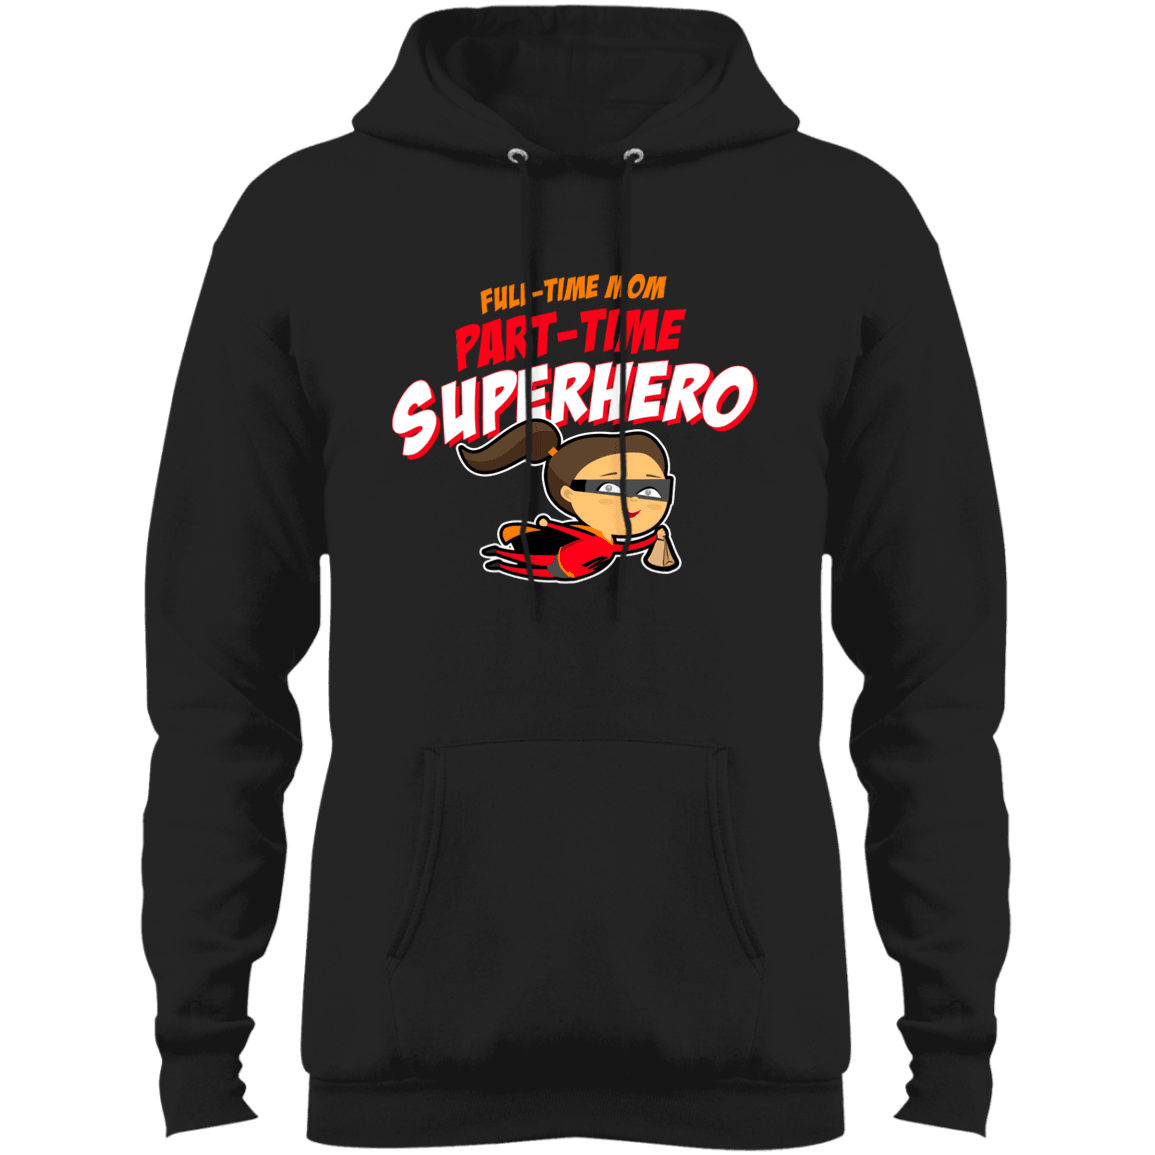 Designs by MyUtopia Shout Out:Full-time Mom Part-Time Superhero Core Fleece Pullover Hoodie,Jet Black / S,Sweatshirts